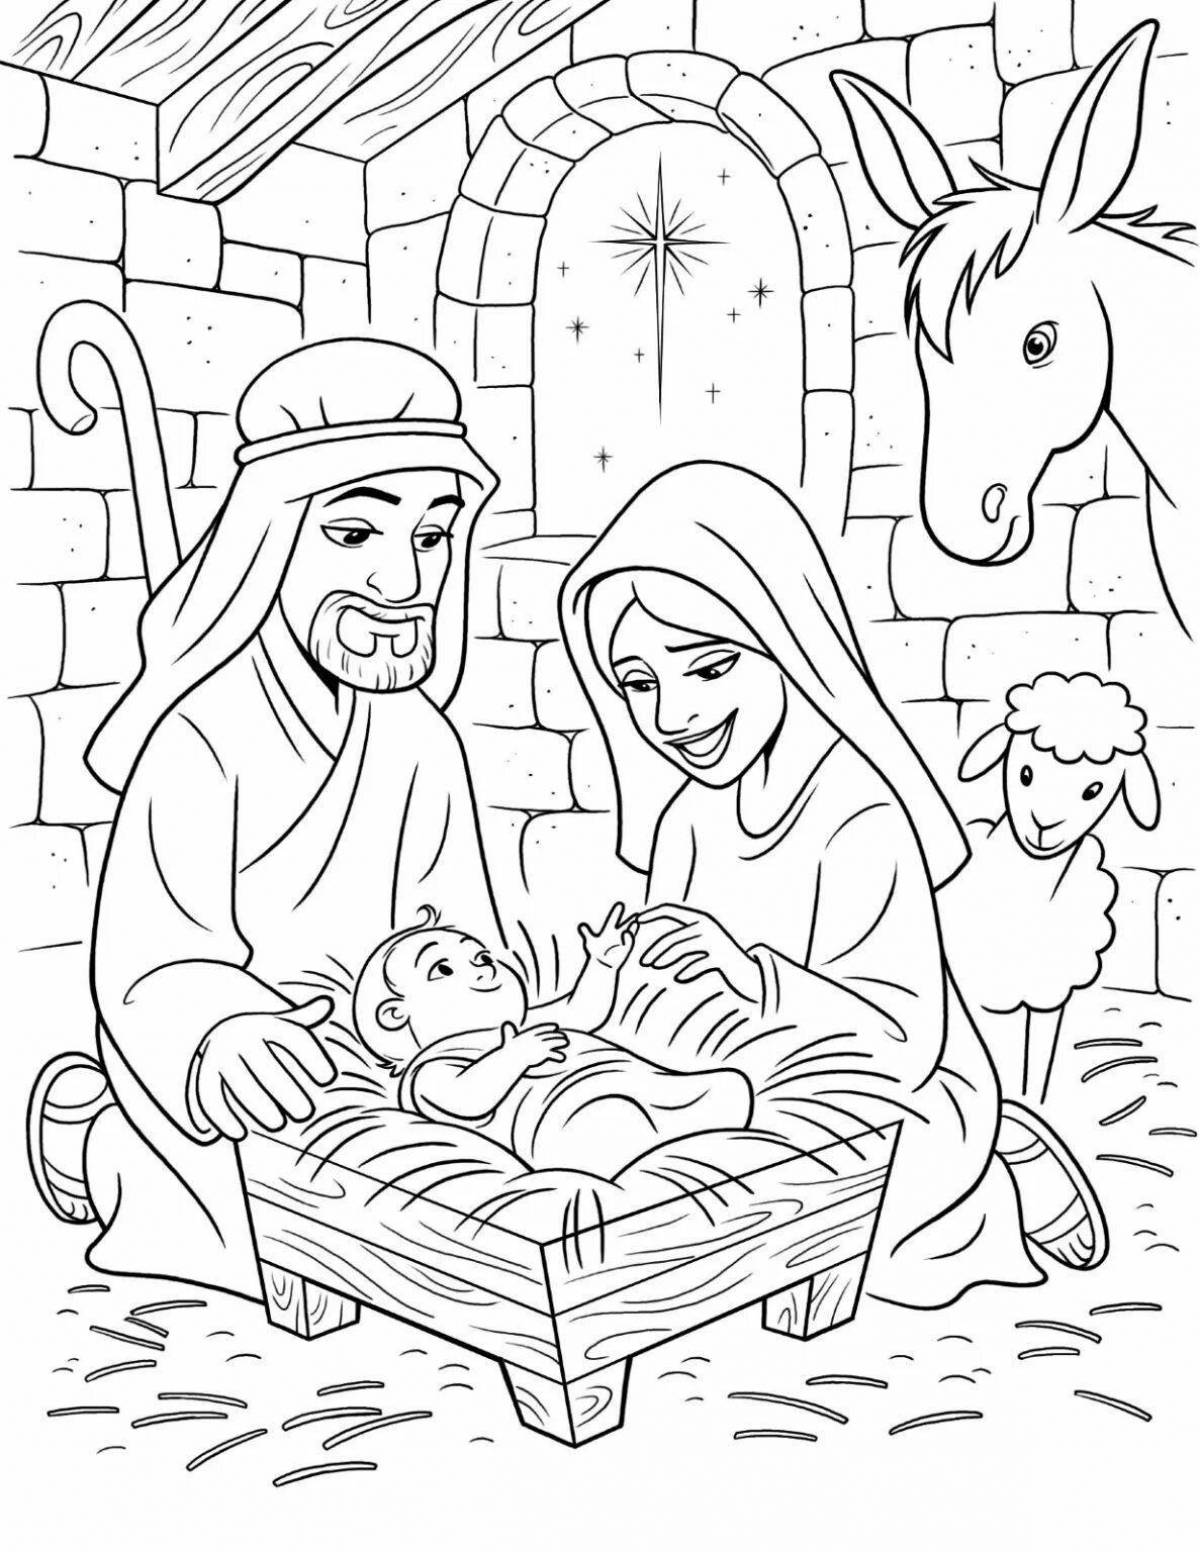 A fun Christmas coloring book for 5-6 year olds